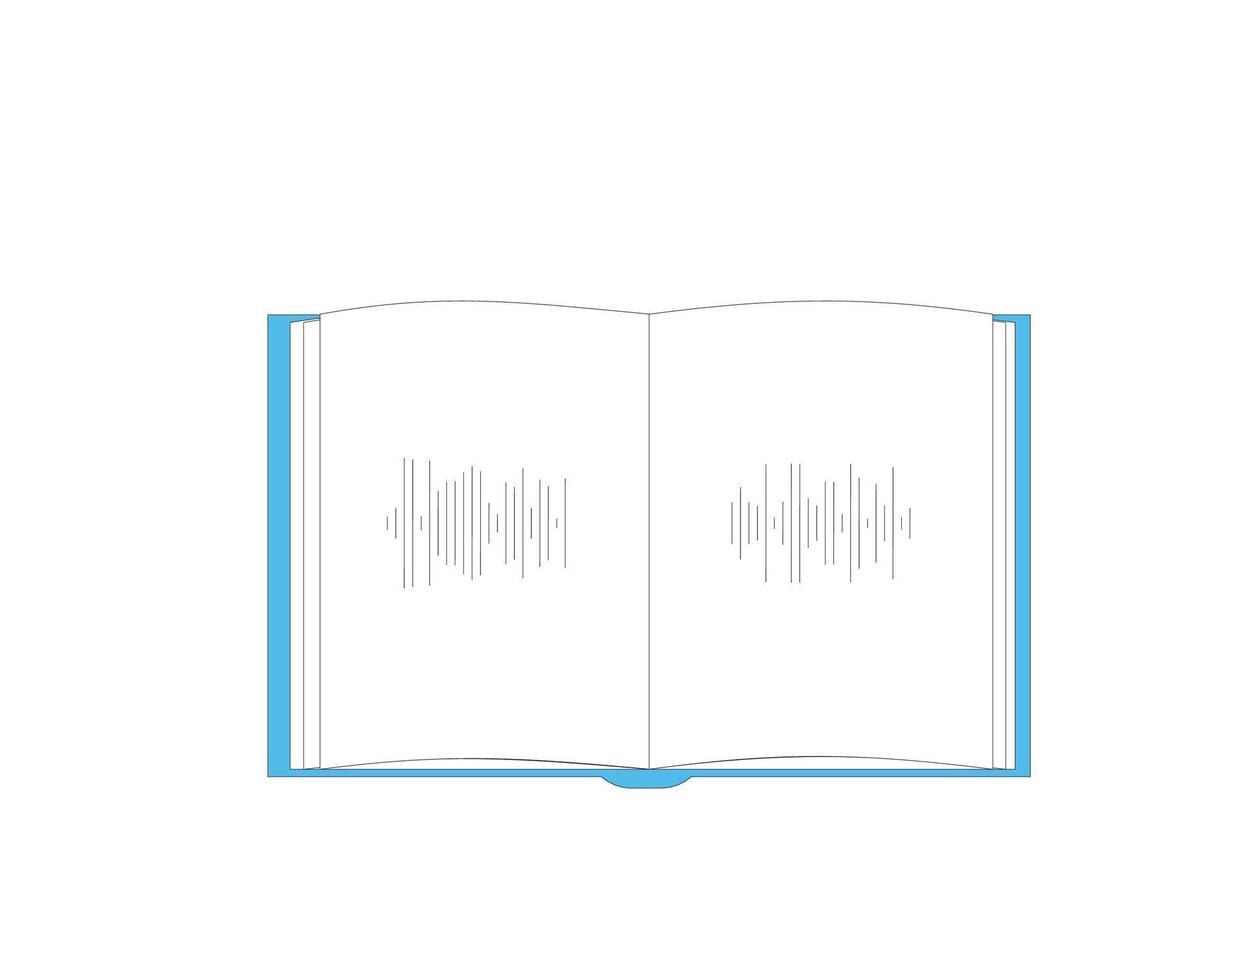 Audiobook. Knowledge, education, learning symbol. Study, research. vector